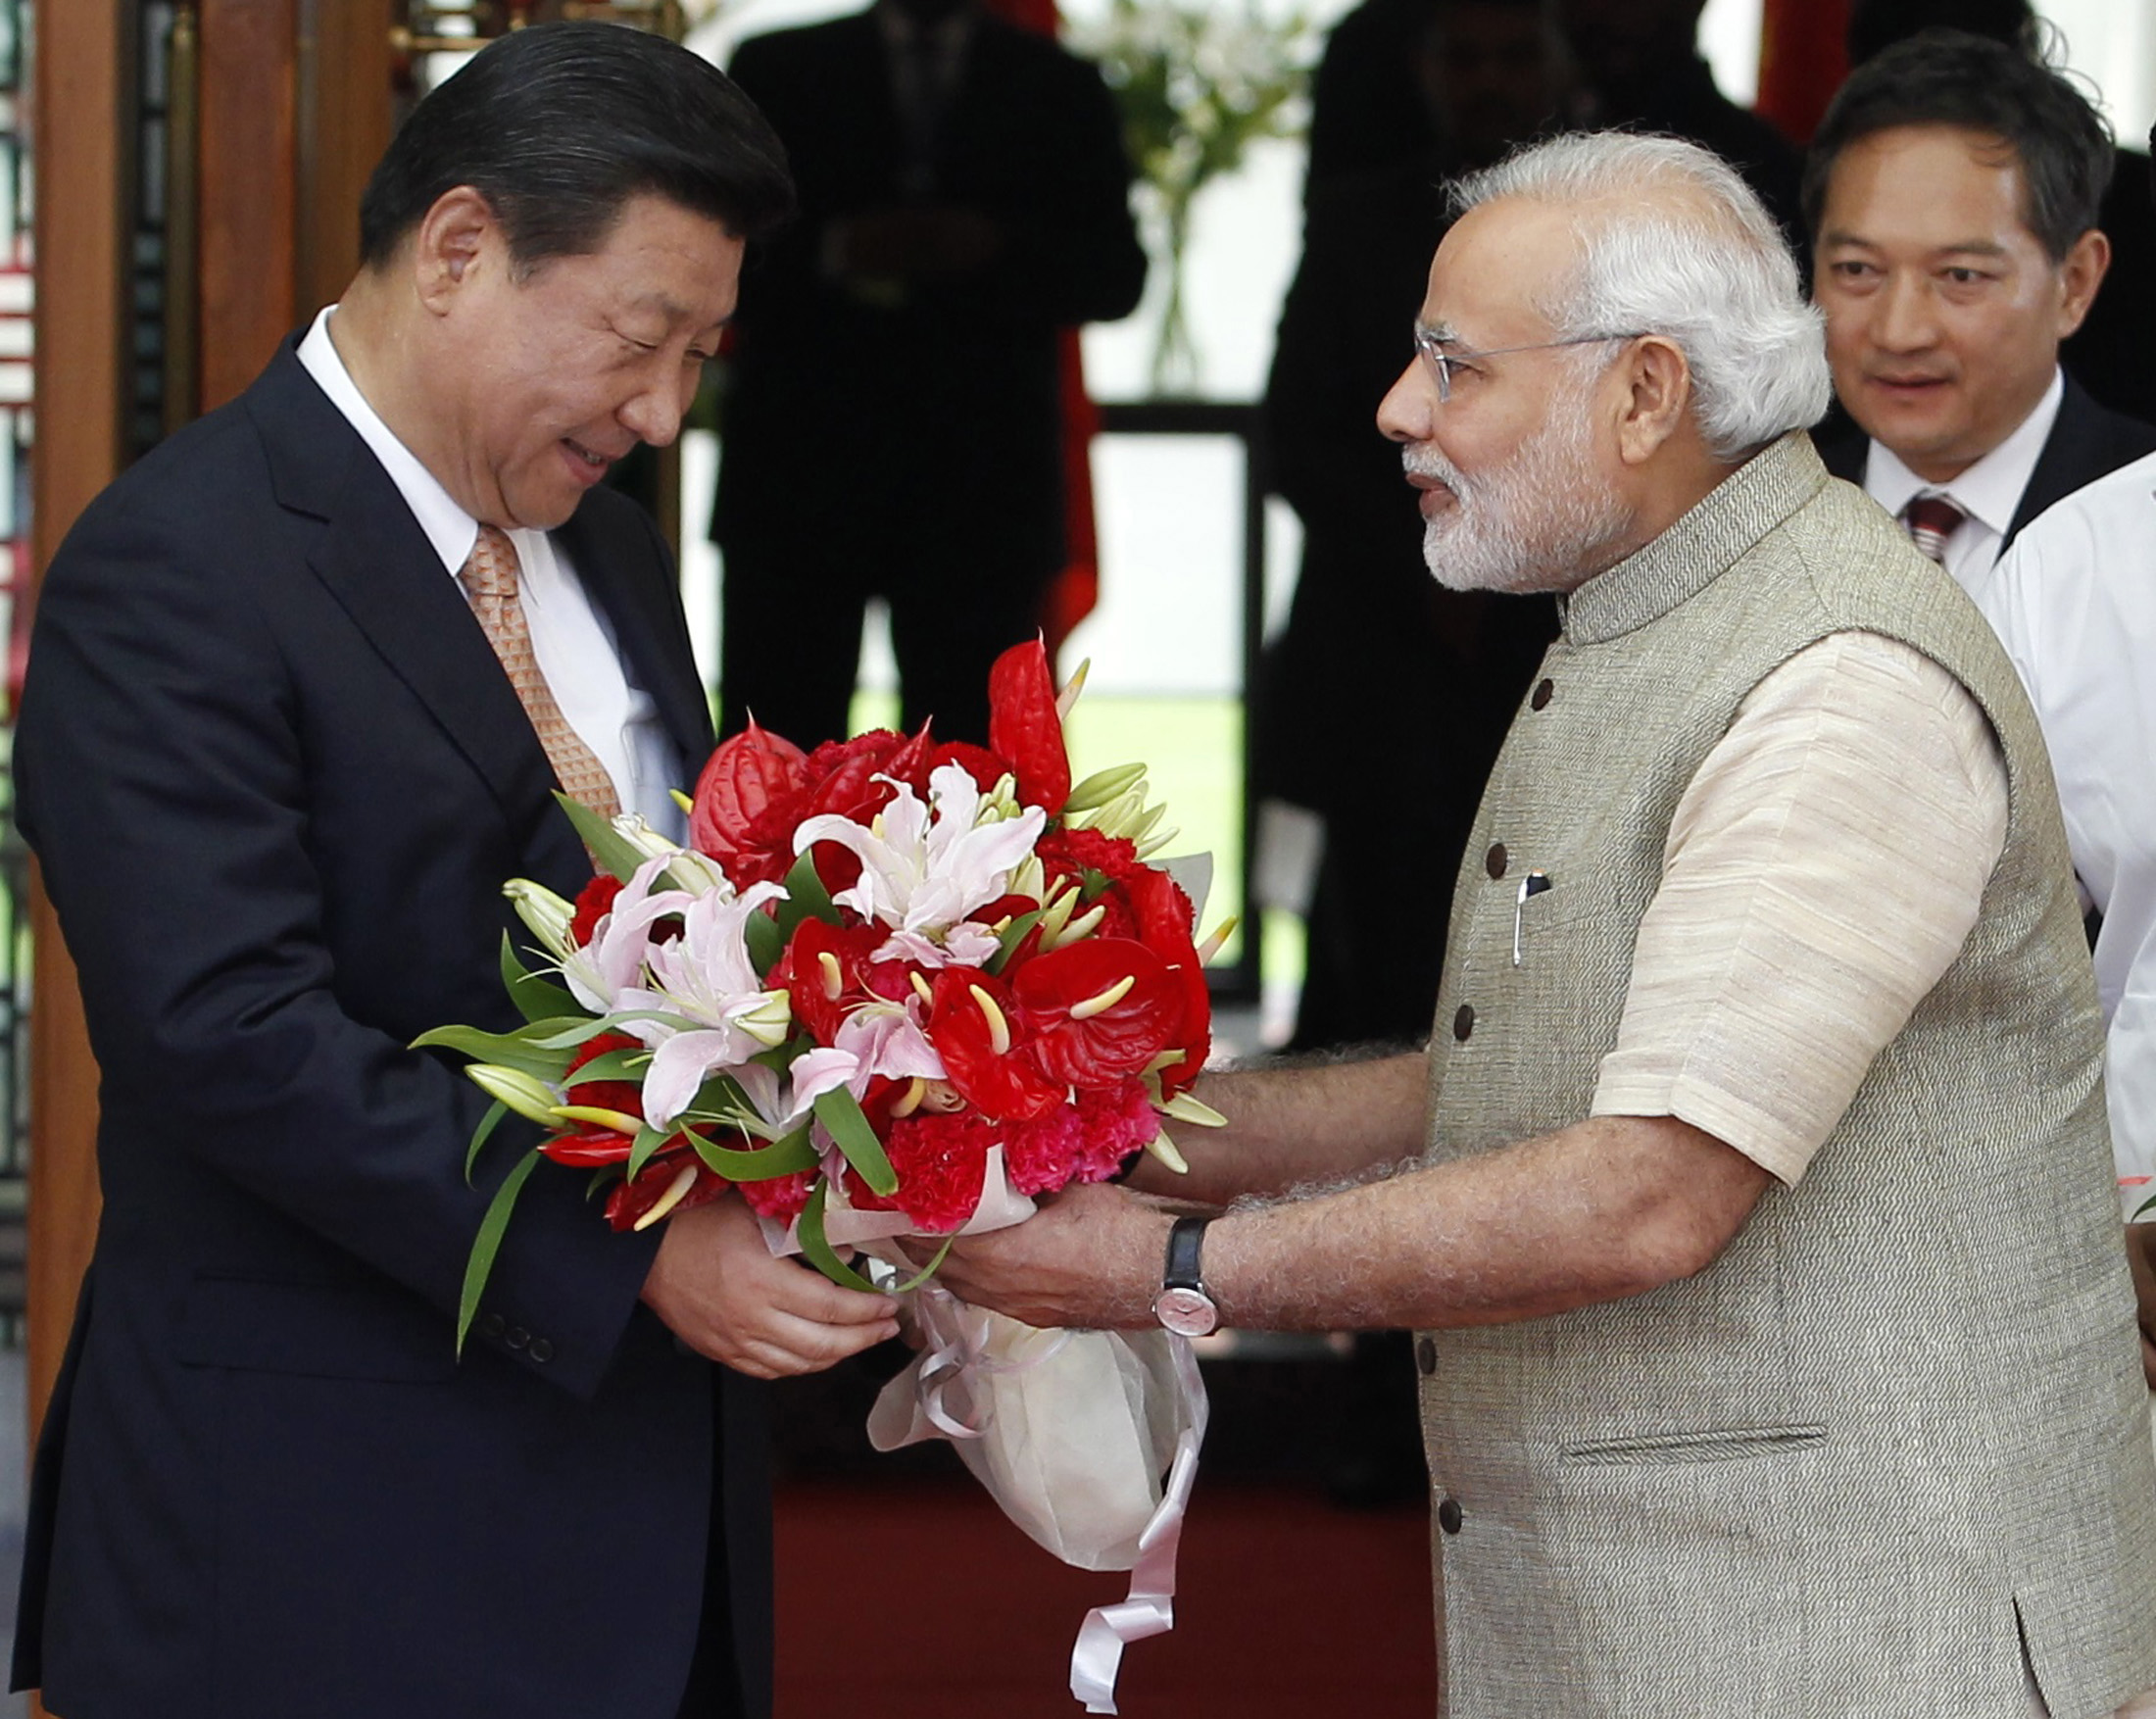 India's PM Modi presents a bouquet to China's President Xi before their meeting in Ahmedabad